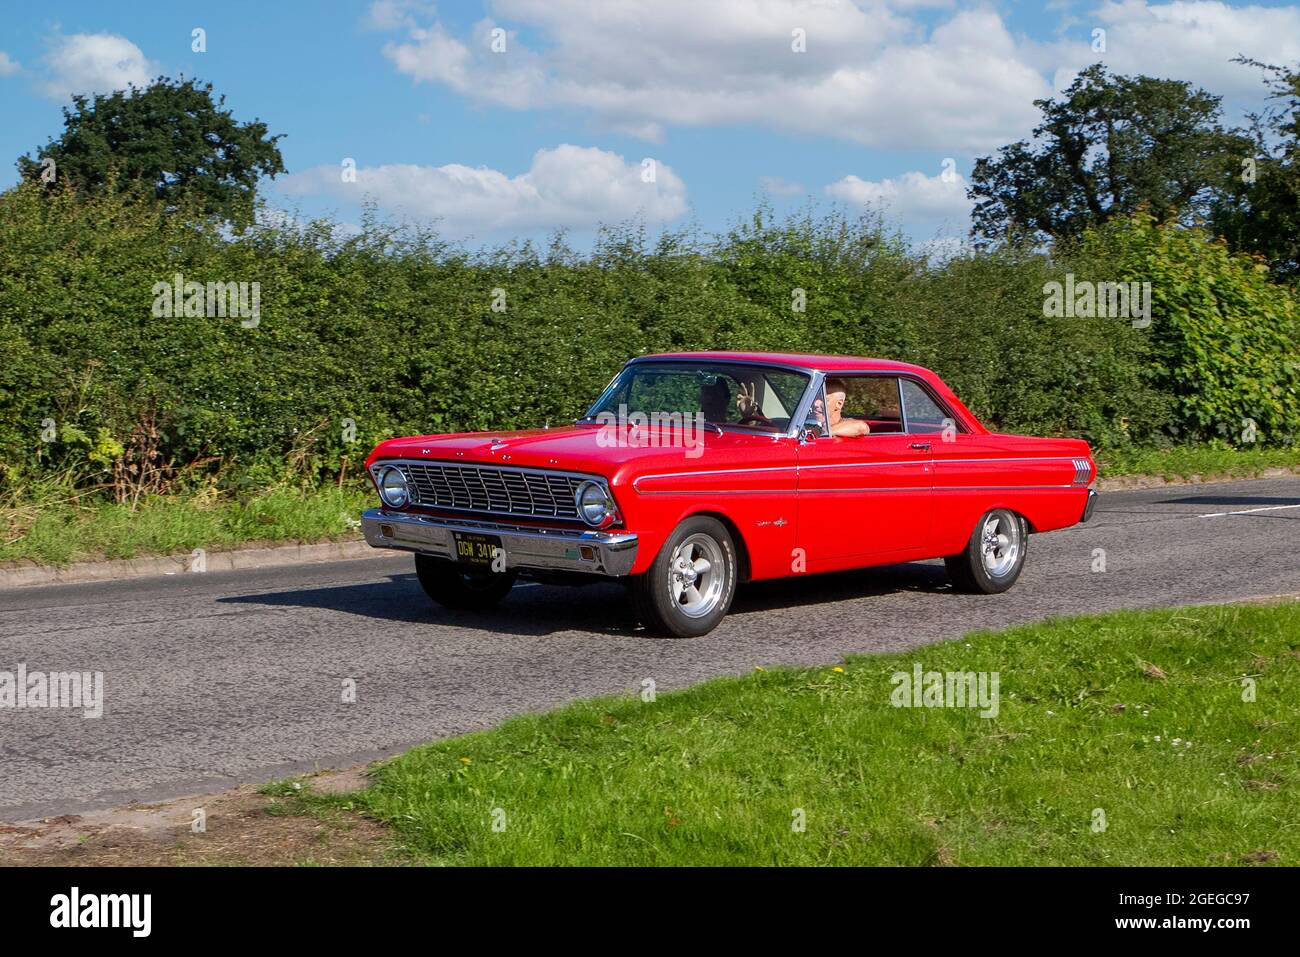 A front view of a red 1960s 60s FORD FALCON SPRINT PETROL vintage classic car retro driver vehicle automobile Stock Photo